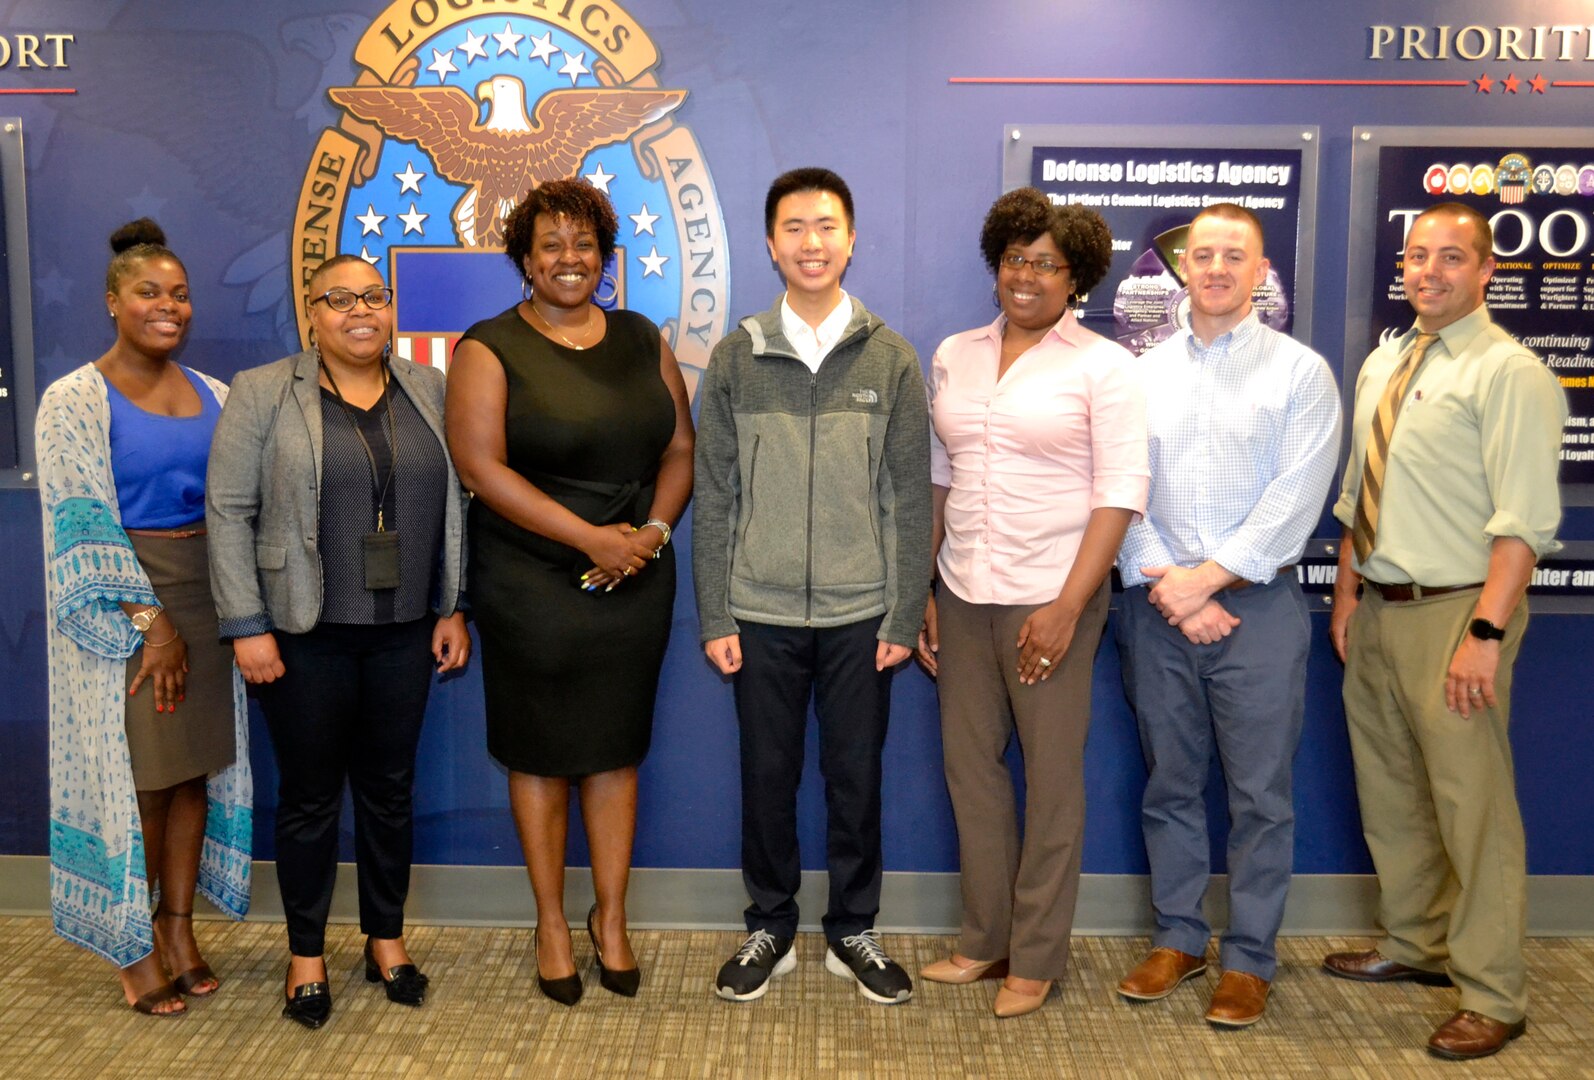 Ning Cao, a former DLA Troop Support intern, center, poses with members of the DLA Troop Support Corporate Communications office and the Philadelphia School District at DLA Troop Support June 5, 2019 in Philadelphia.